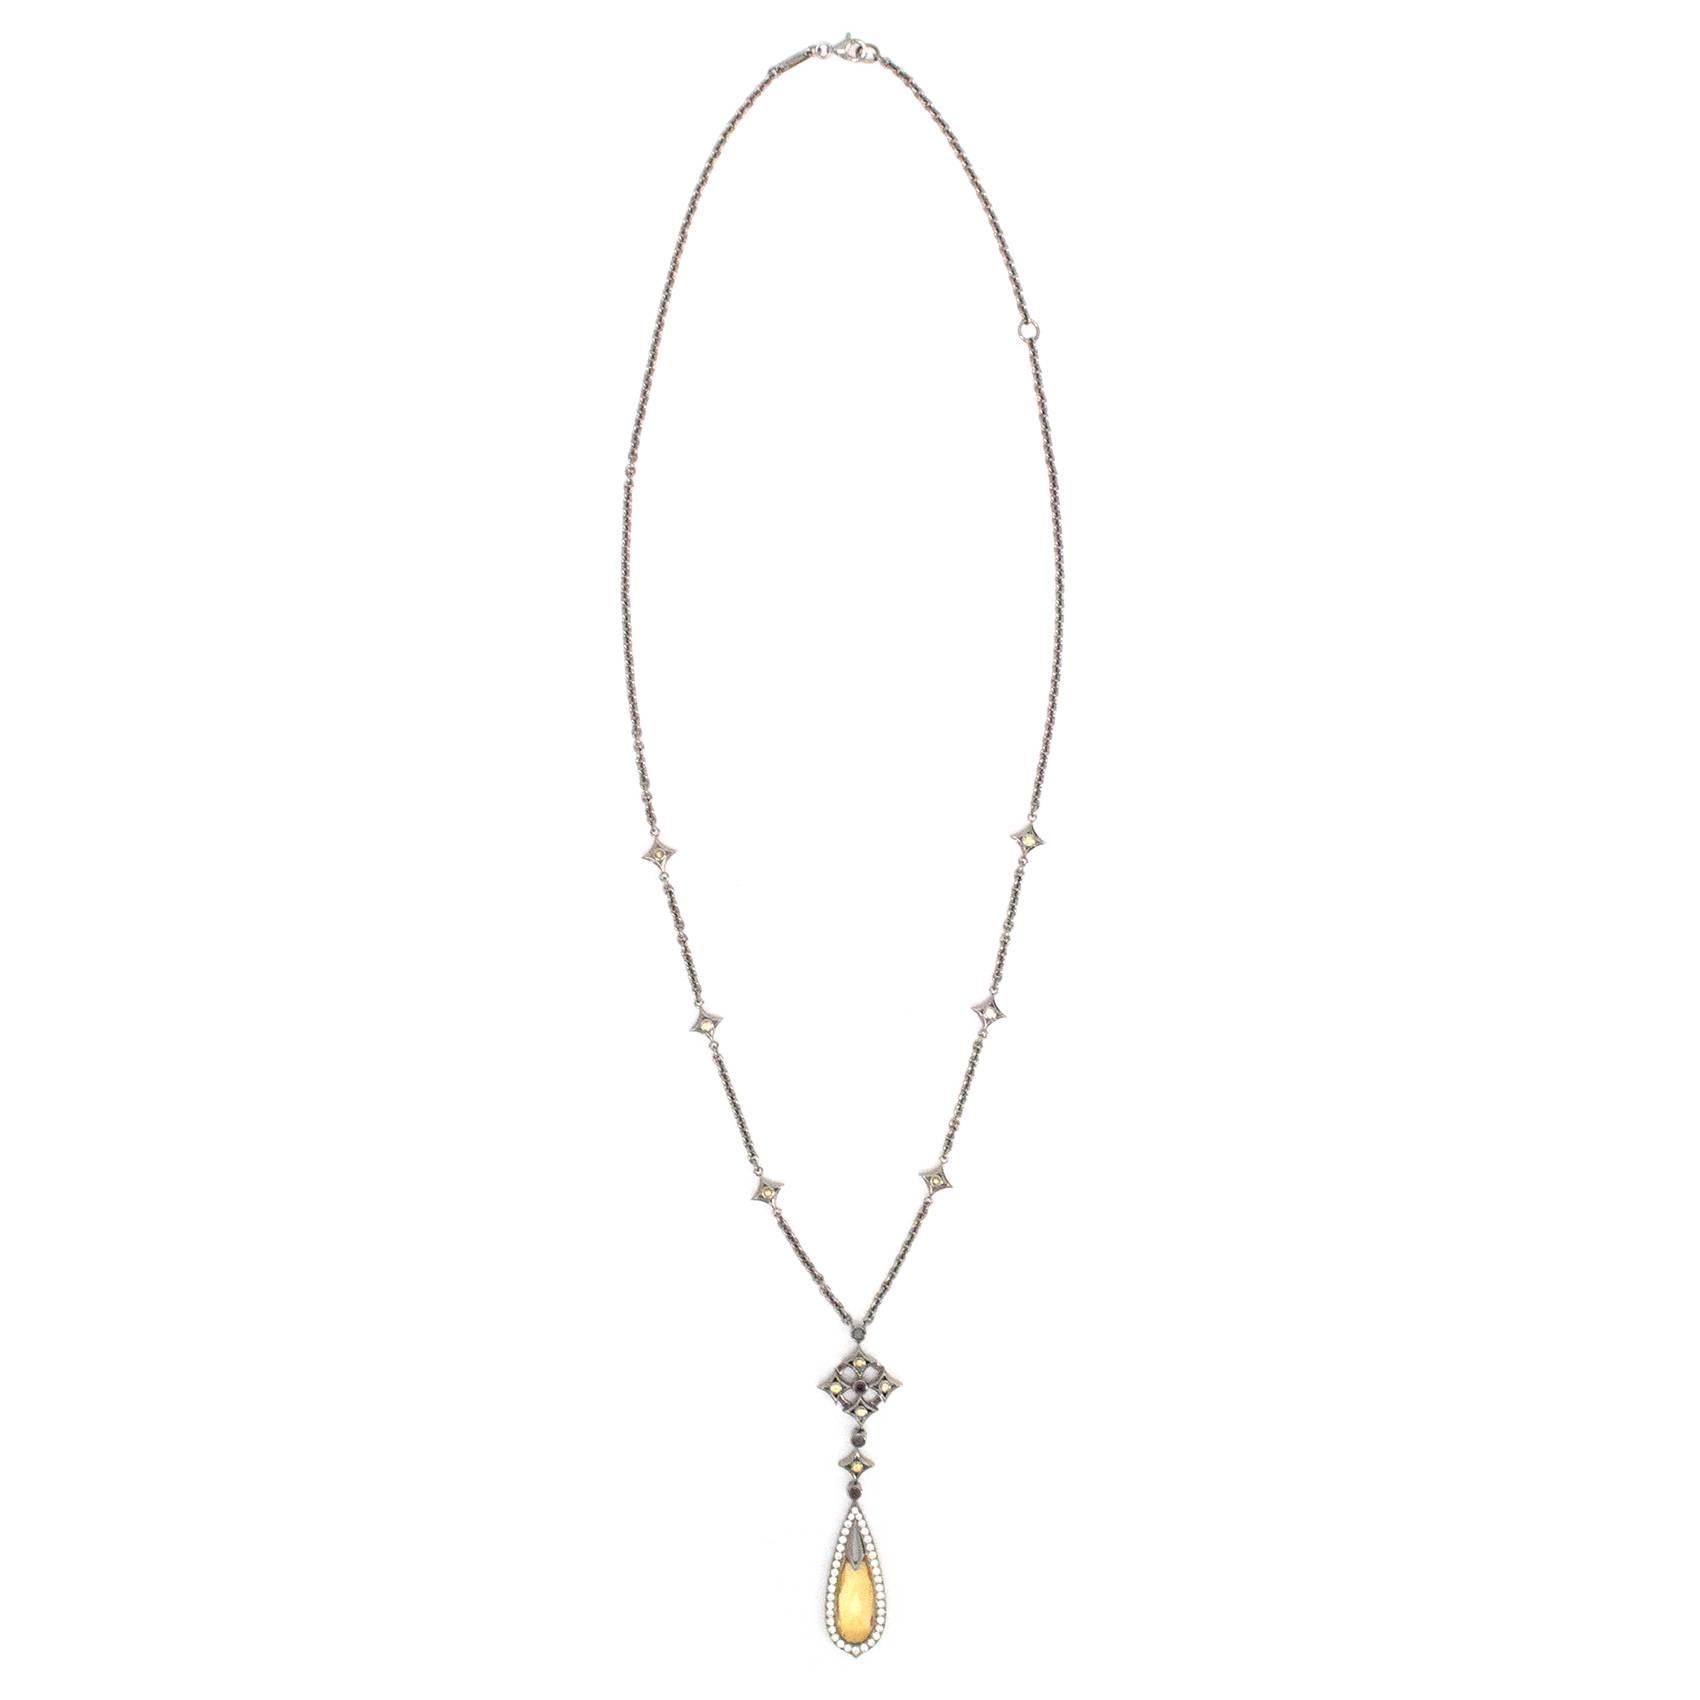 Women's Theo Fennell Black and Silver Necklace with Yellow Sapphire Pendant For Sale